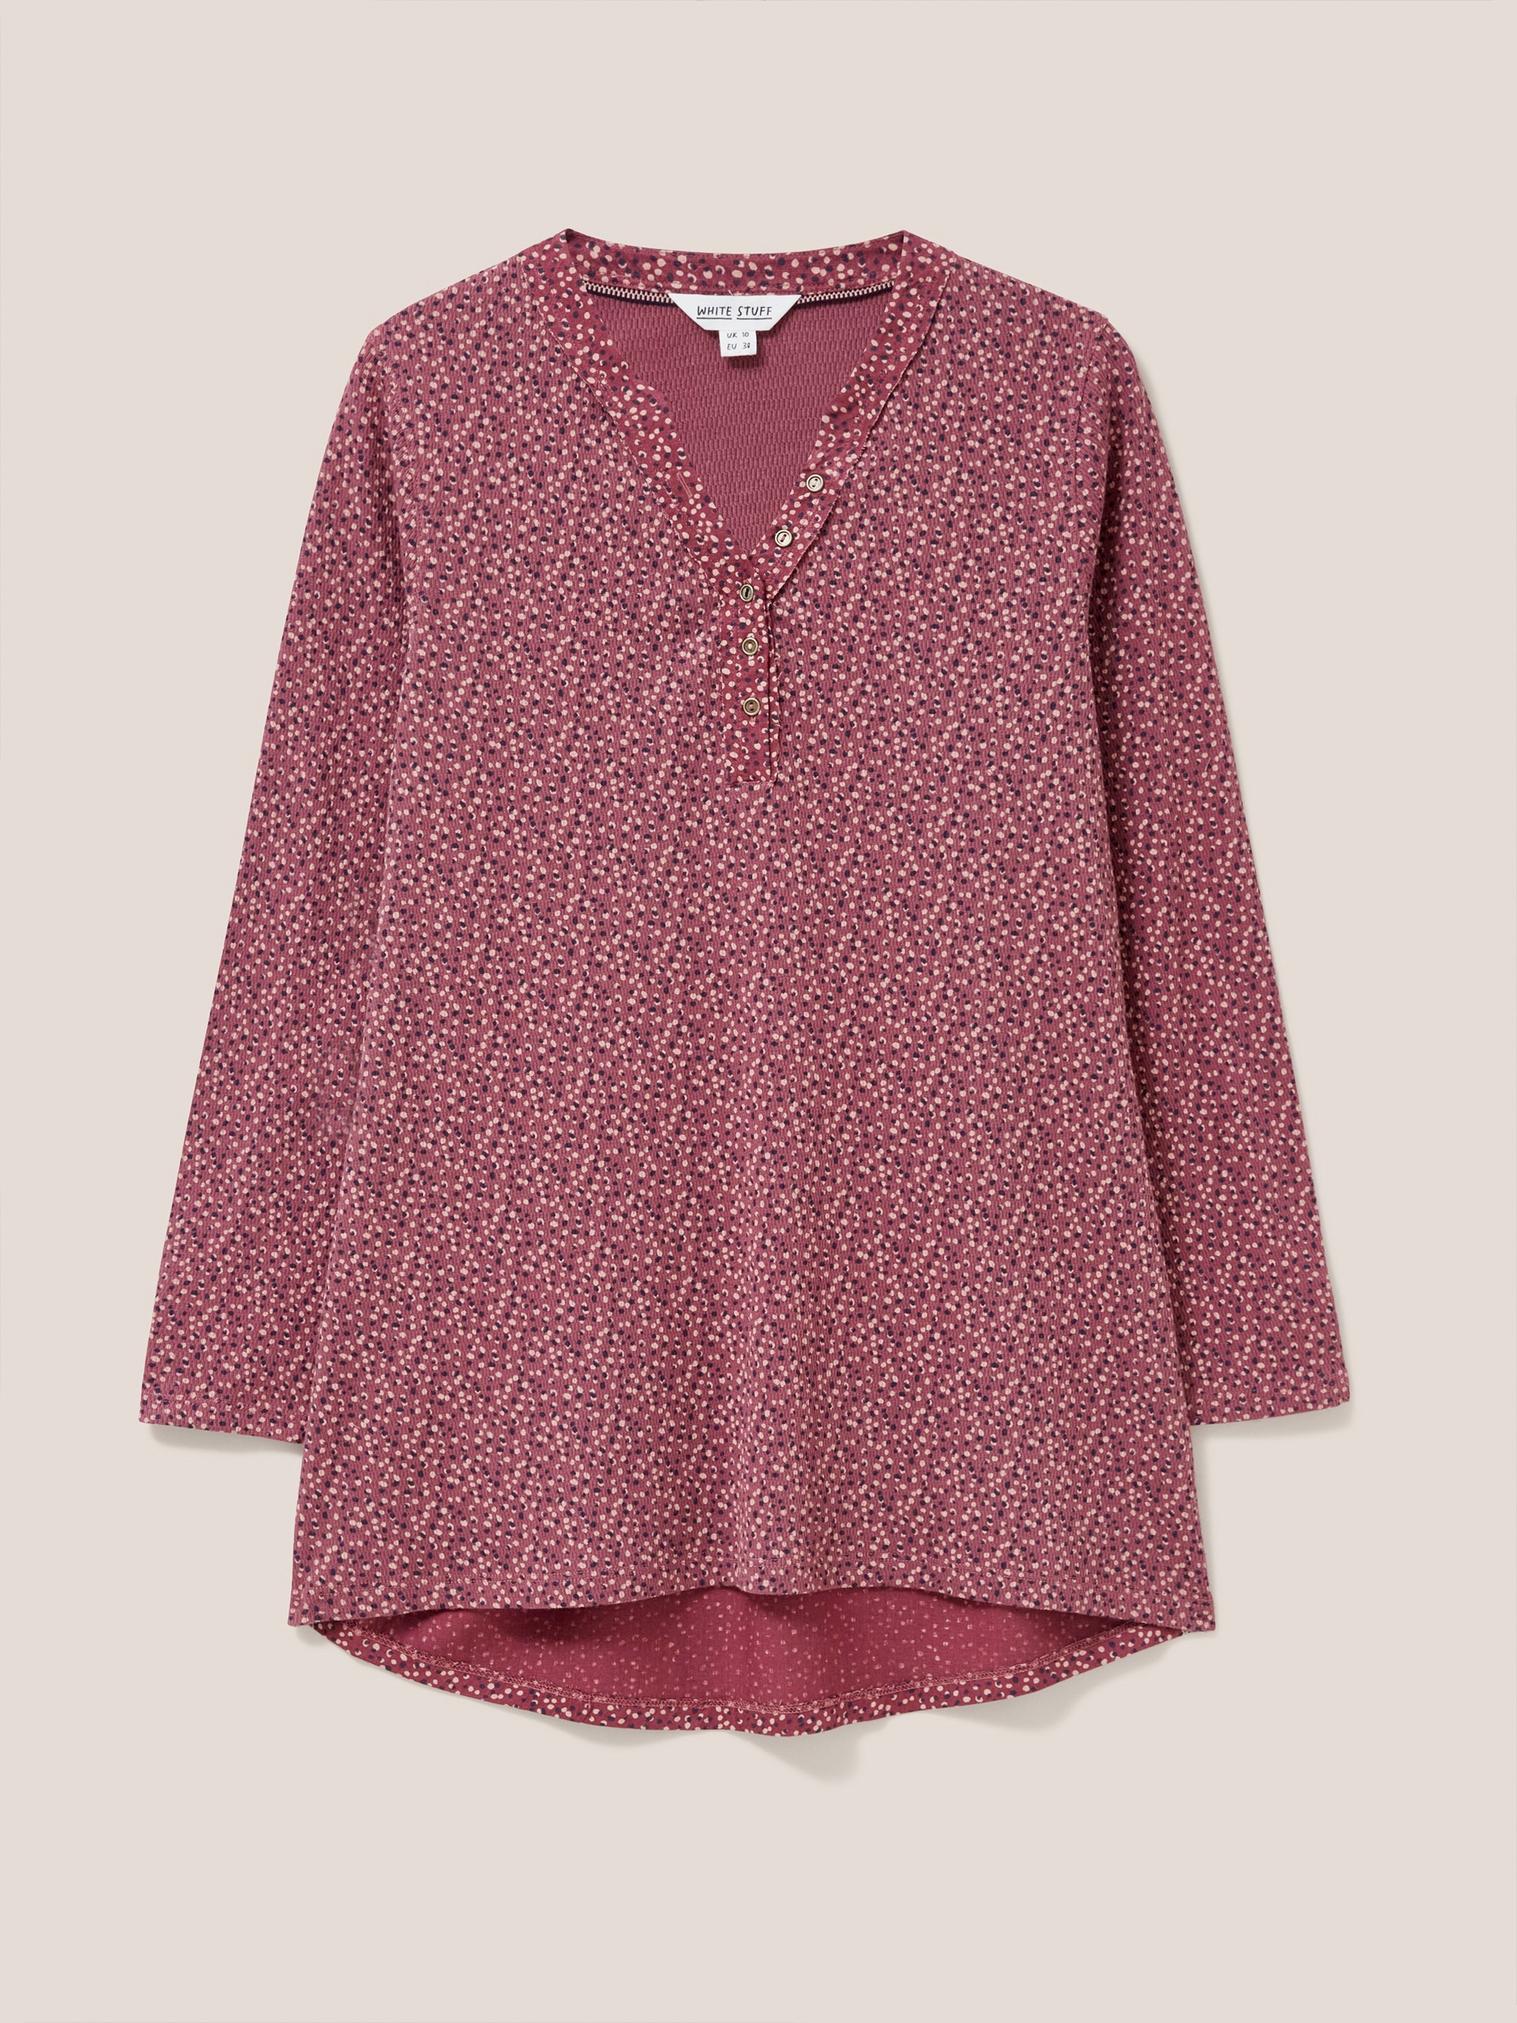 TAMMY TUNIC in PINK PR - FLAT FRONT